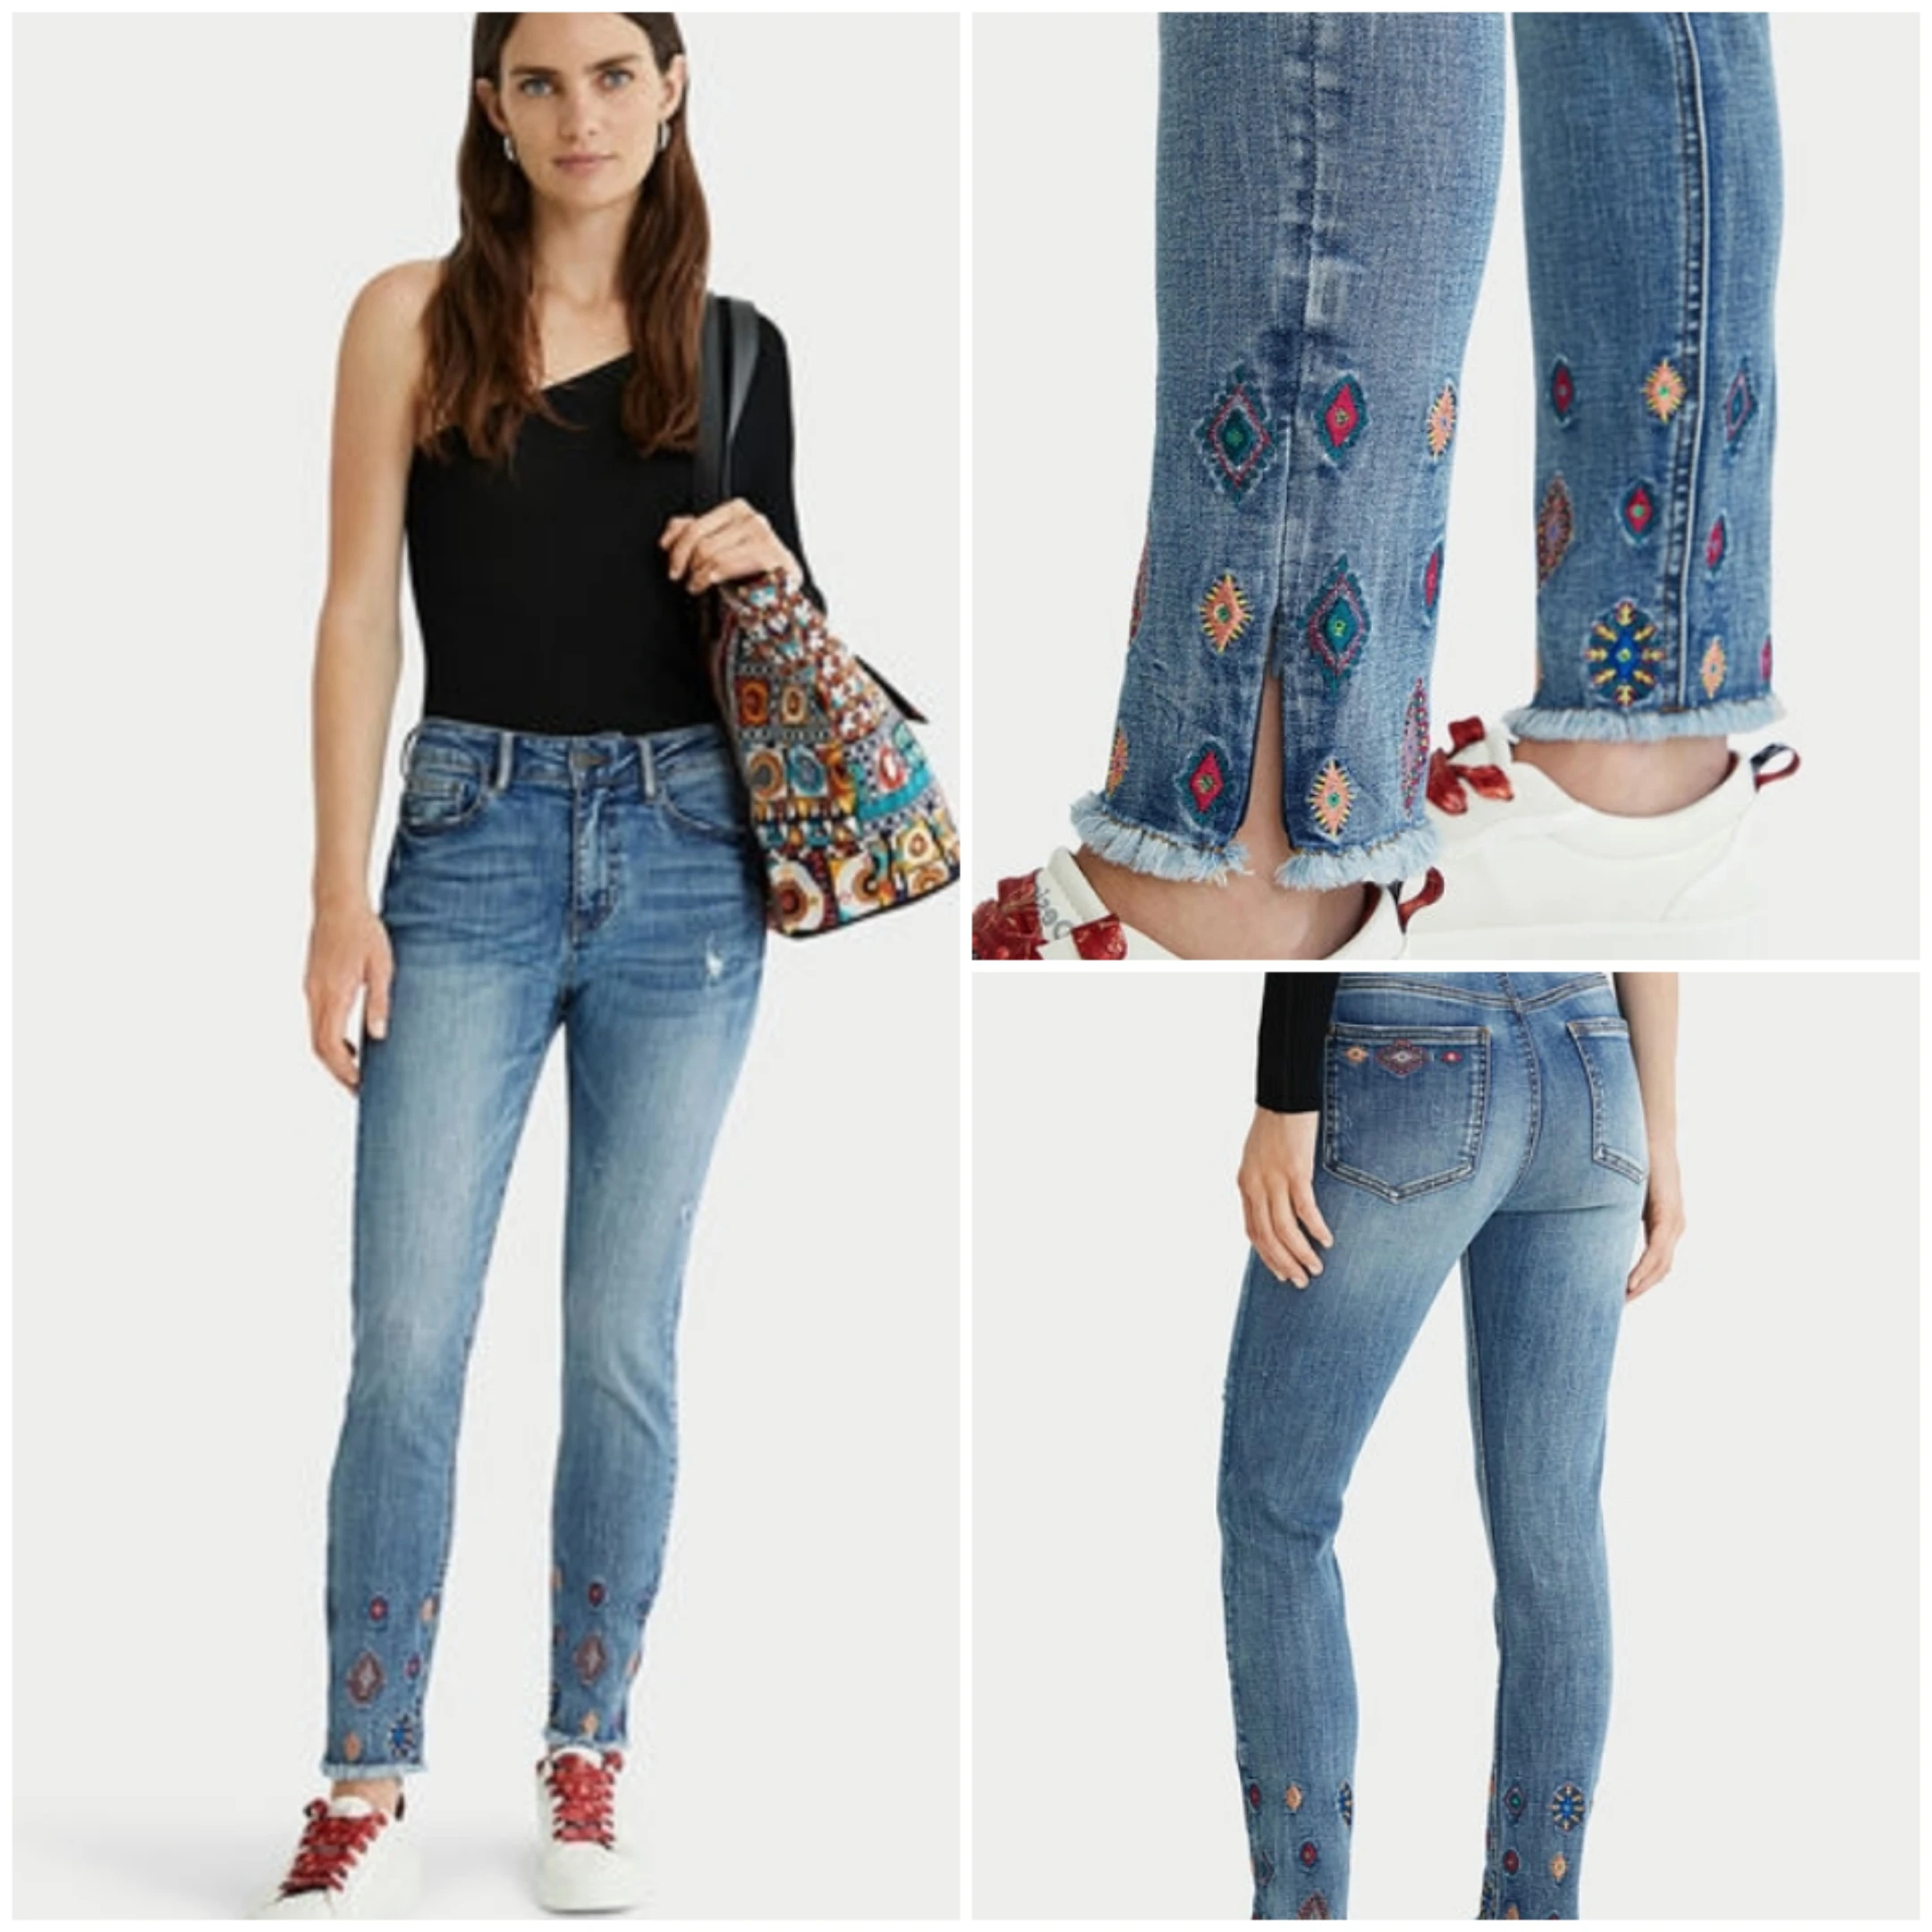 

Spanish desigual women's leggings, embroidered on both sides of the trouser legs, stretch jeans, slim printed cropped trousers